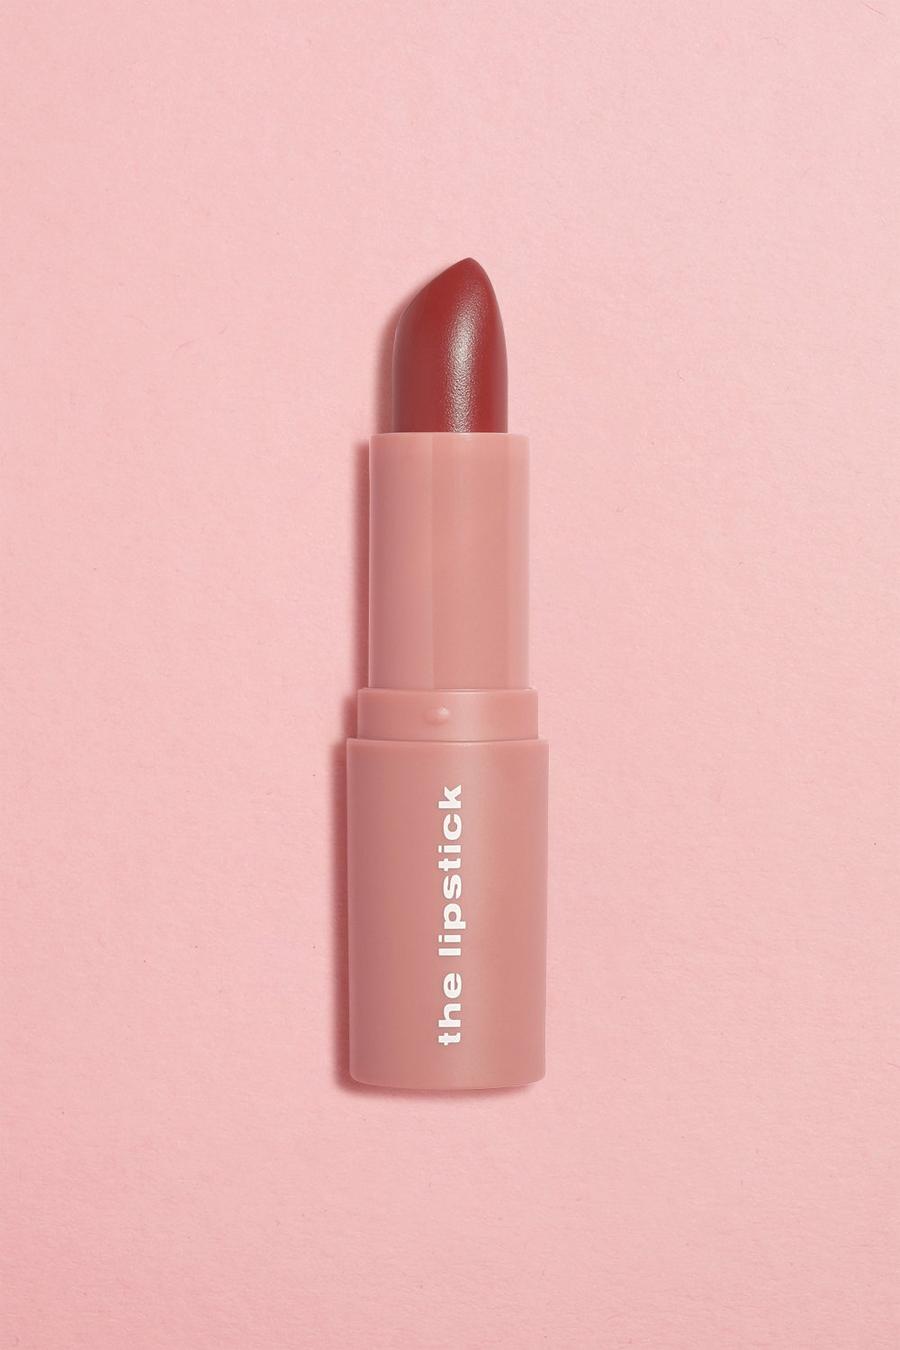 Boohoo Beauty - Rossetto The Lipstick - Warm Brown image number 1